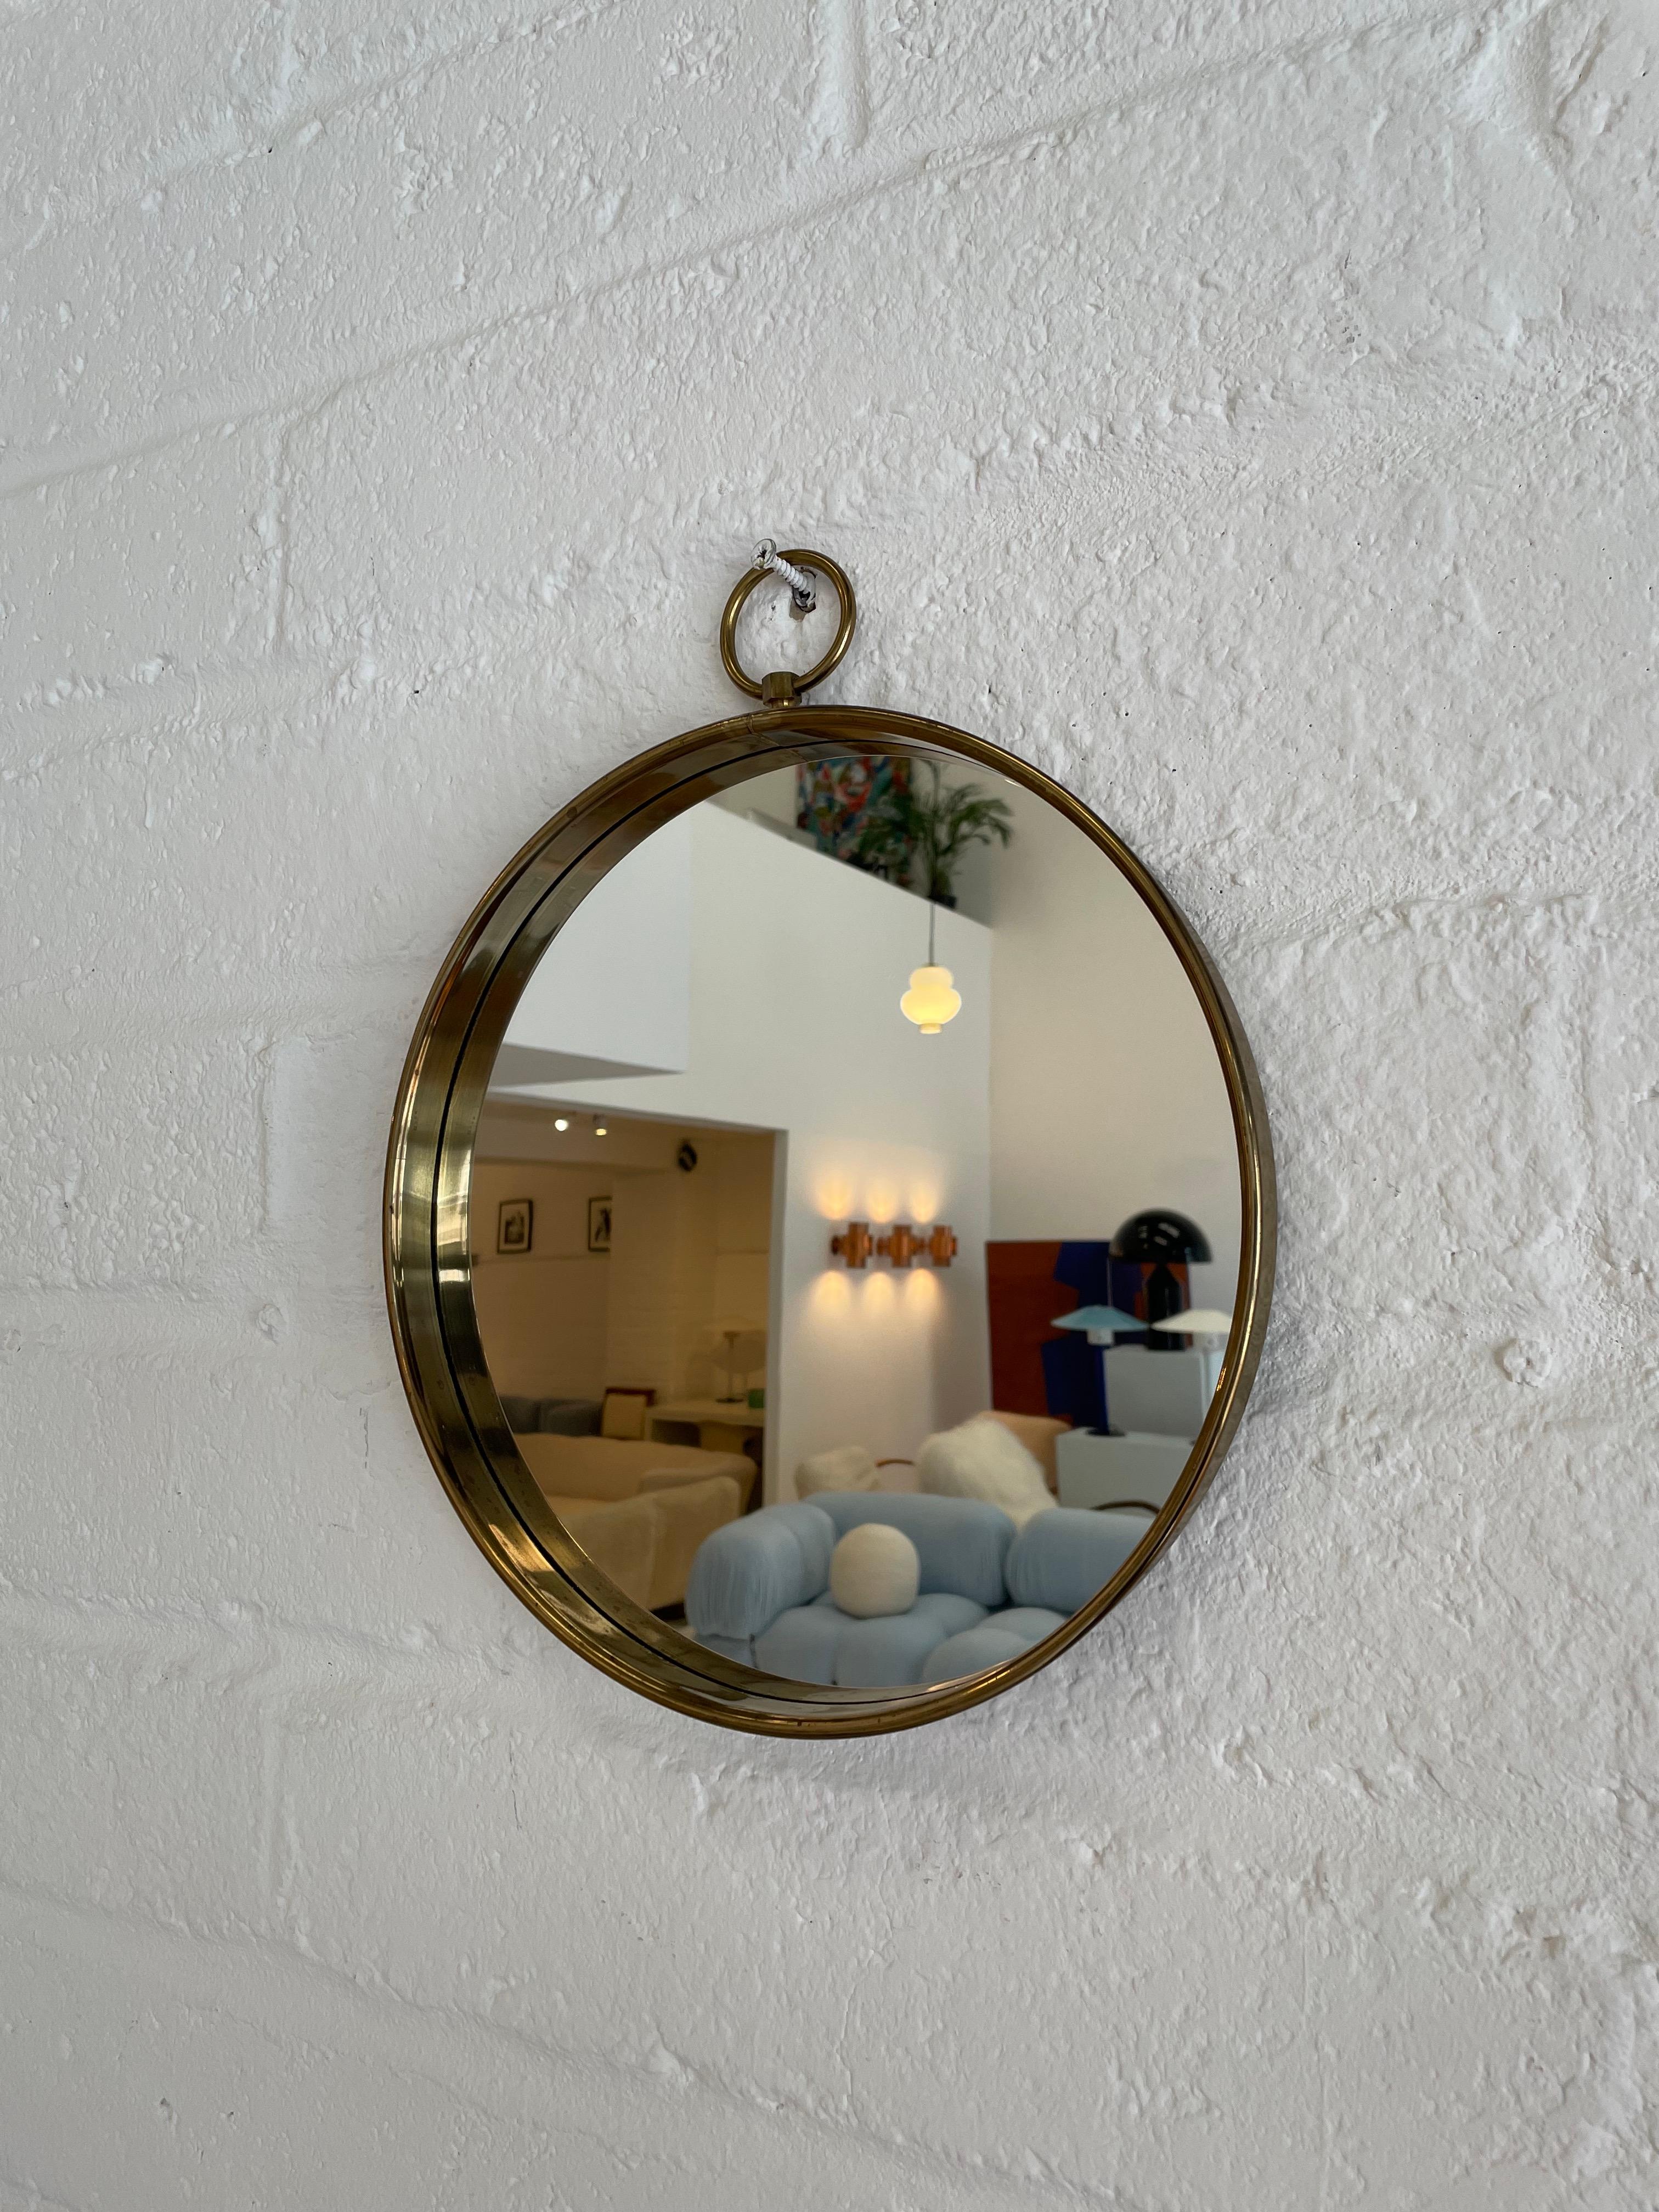 Diameter: 30cm

Date: 1960s
Materials: Brass, Glass 

Description: The 1960s circular brass wall mirror is a retro-inspired piece that epitomises the sleek and glamorous design of the 1960s era
